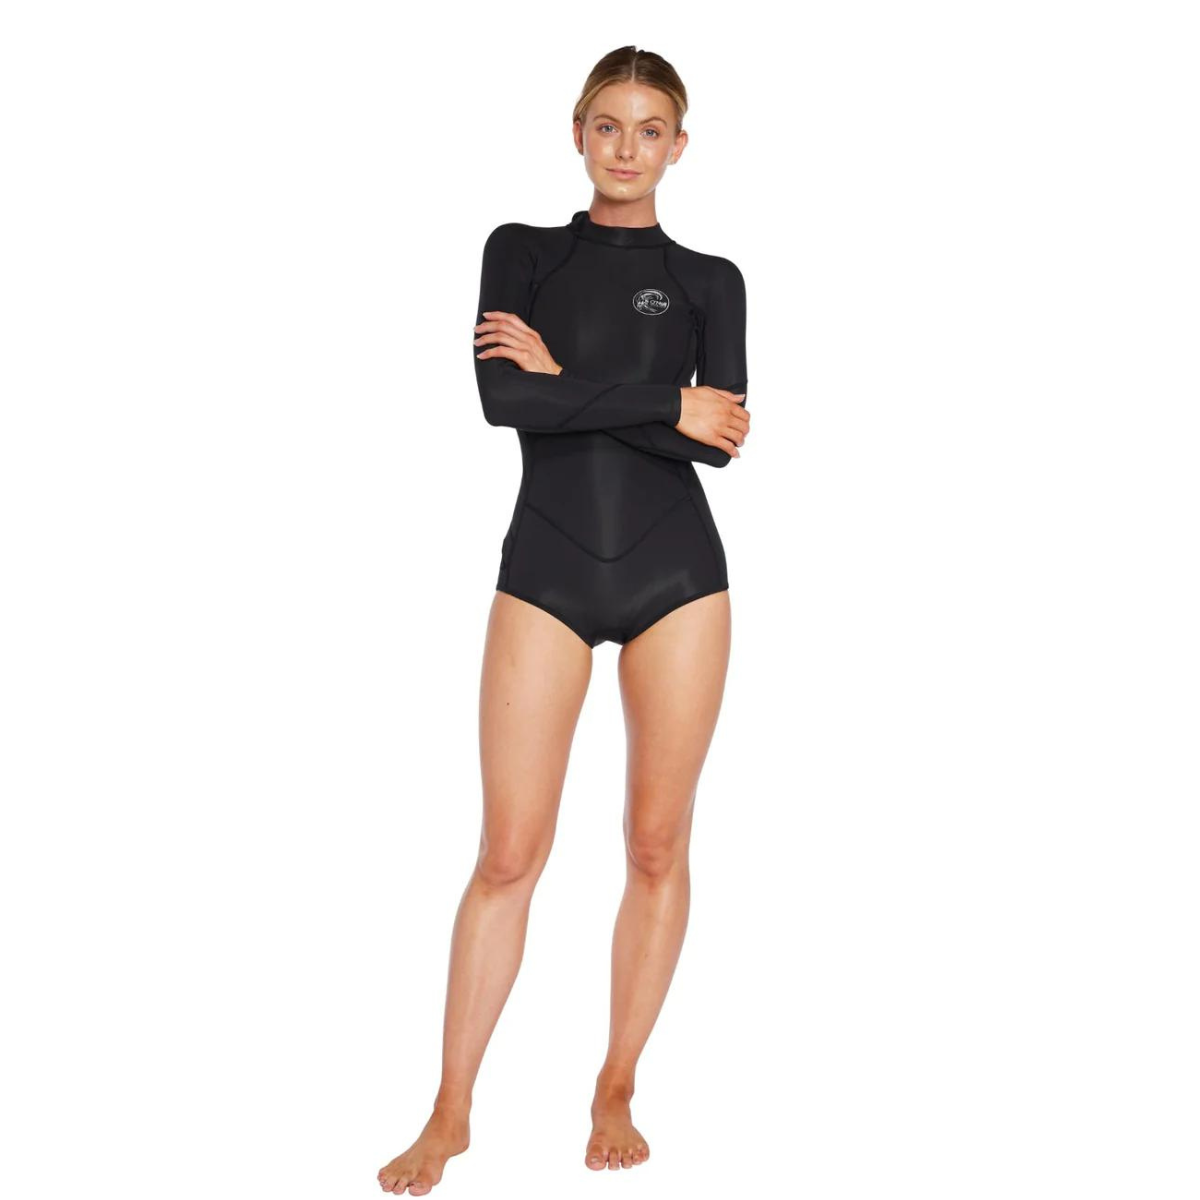 WETSUIT MUJER -  BAHIA BZ LS MID SPRING 2MM - A05 BLK/BLK/BLK